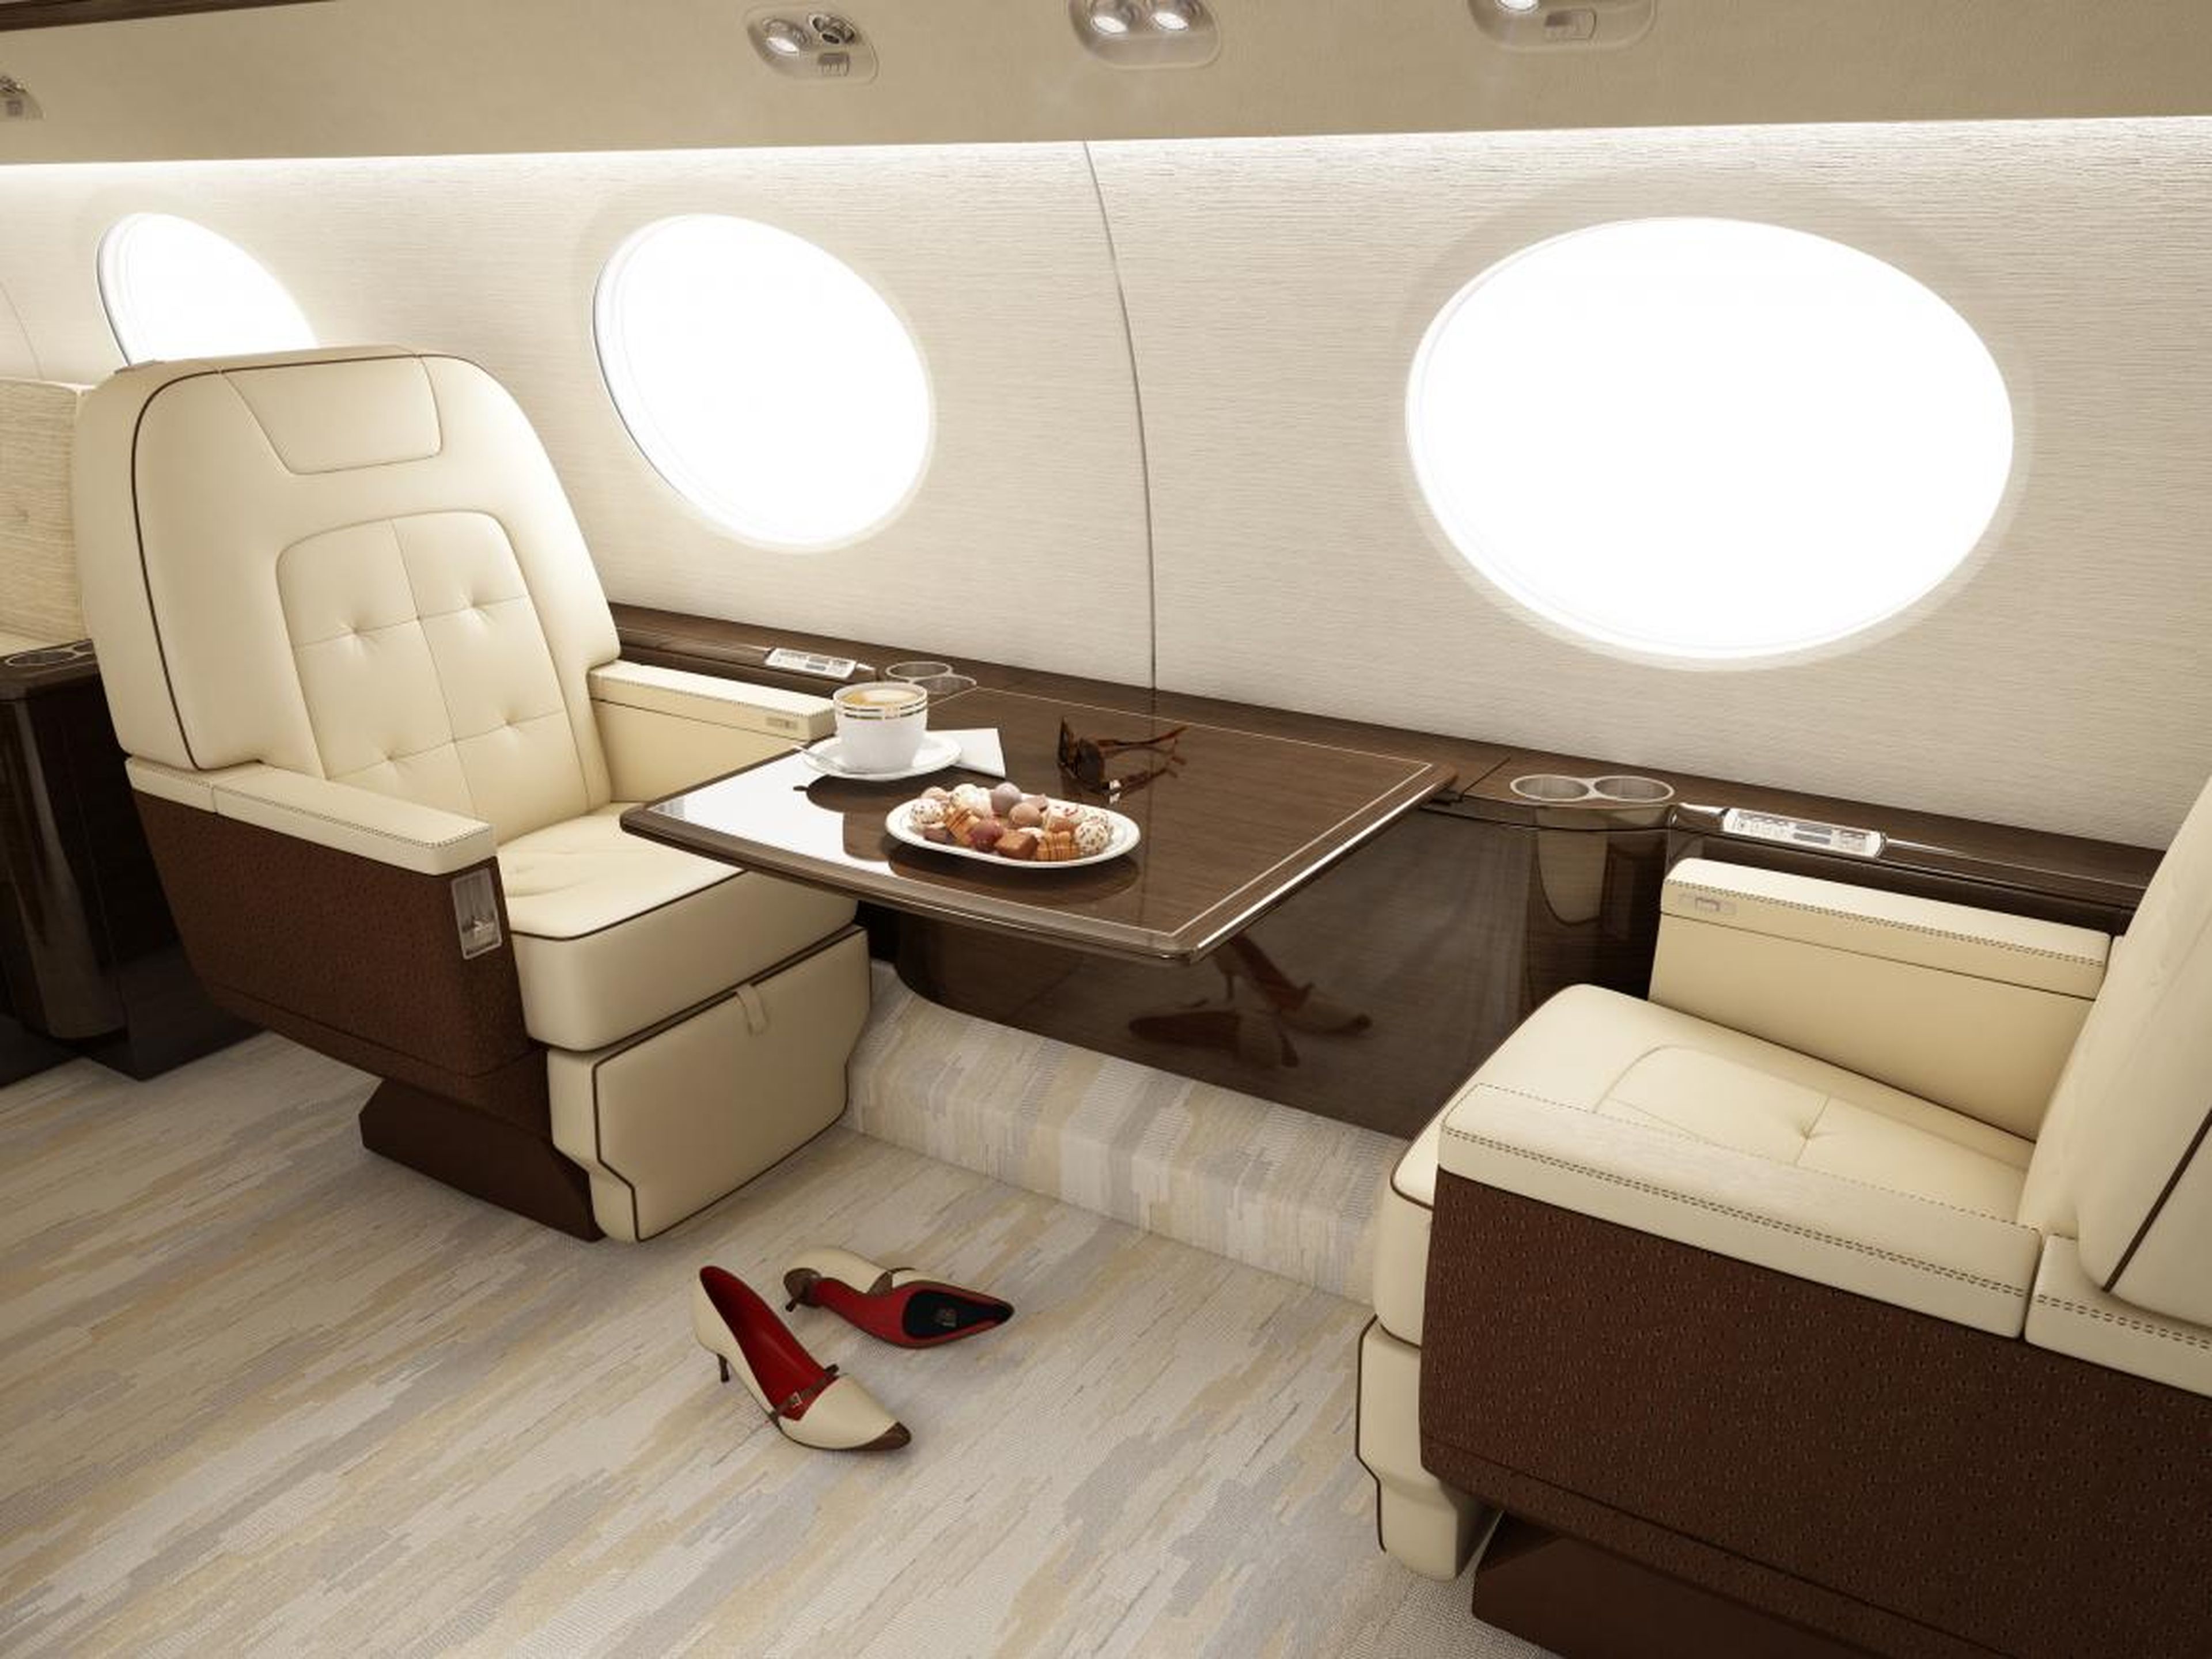 A rendering of a G550 interior.